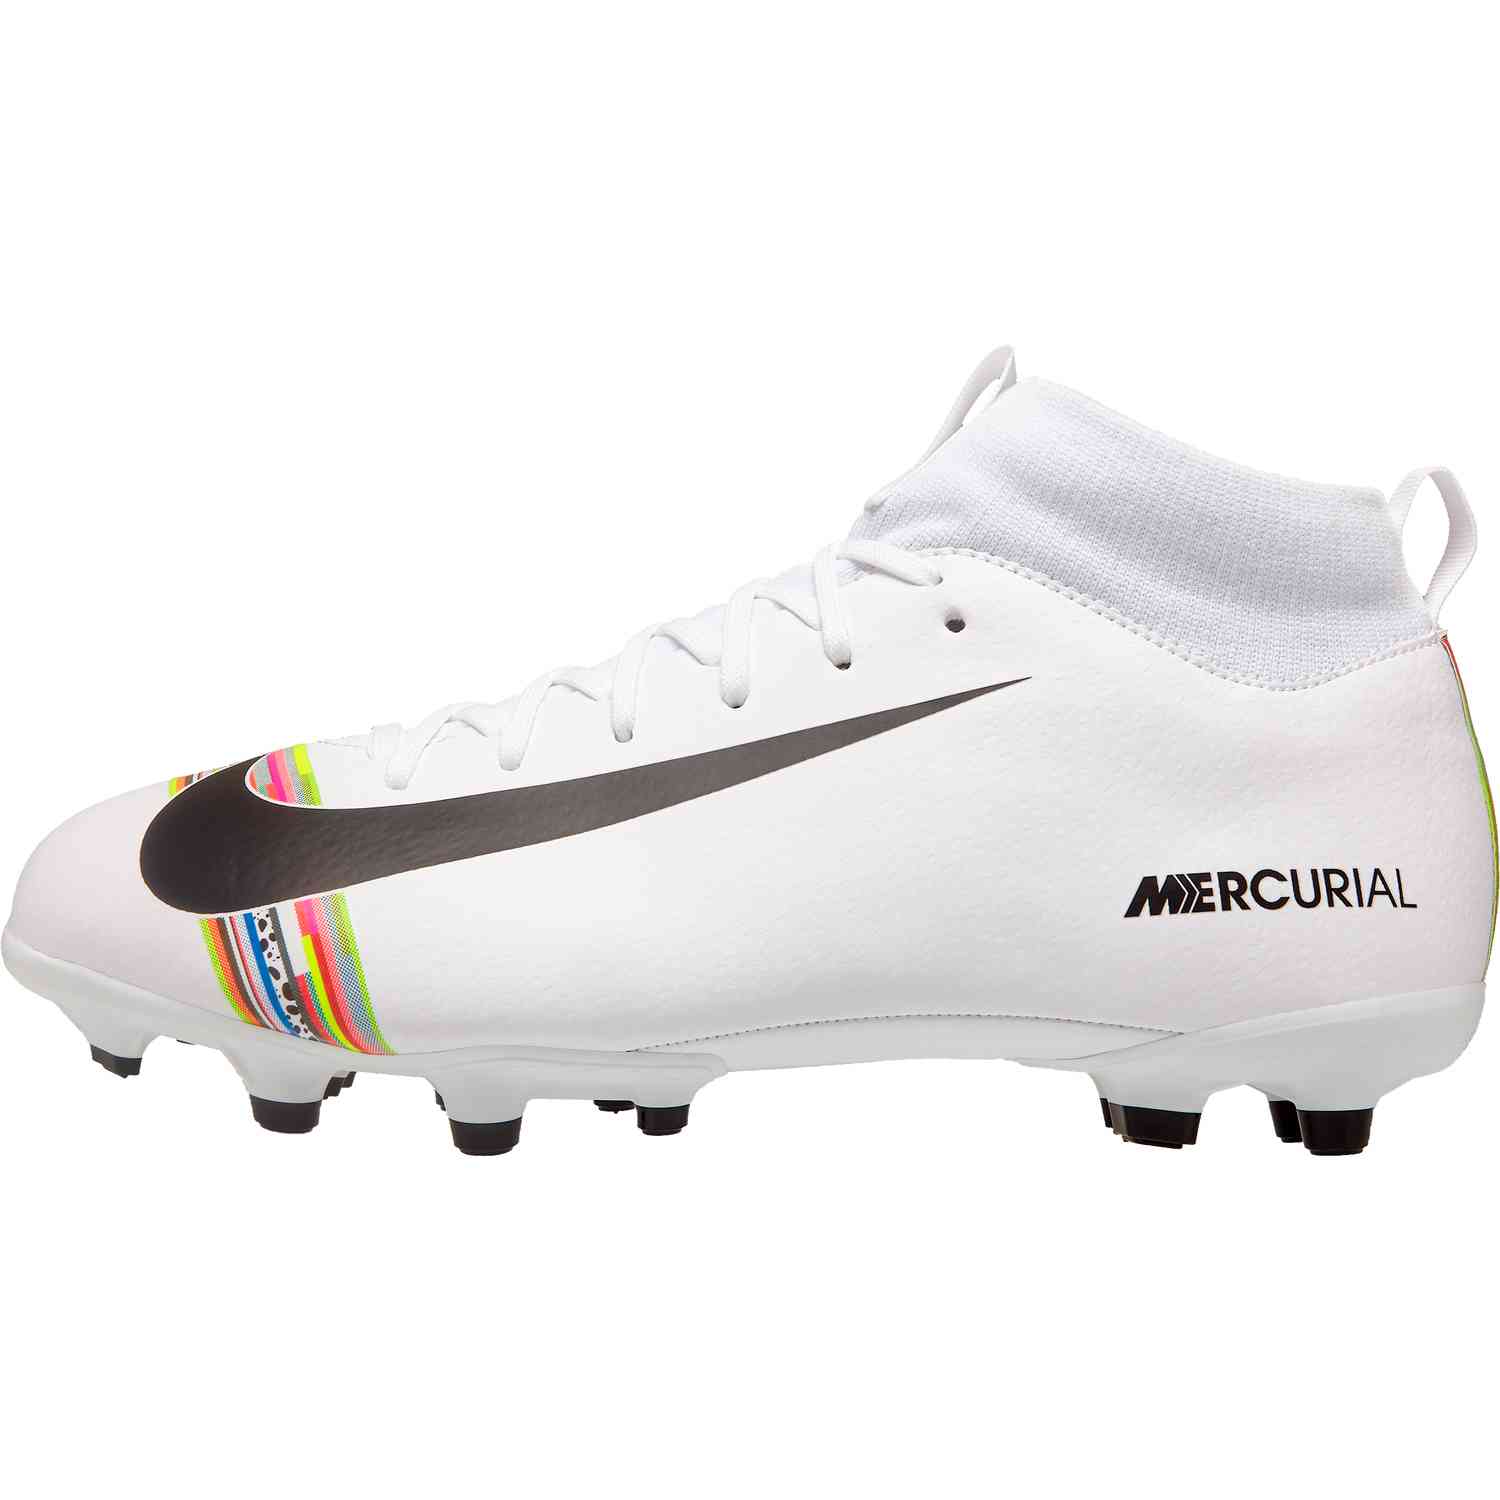 Nike Mercurial Superfly VI Academy MG Just Do It. Pinterest